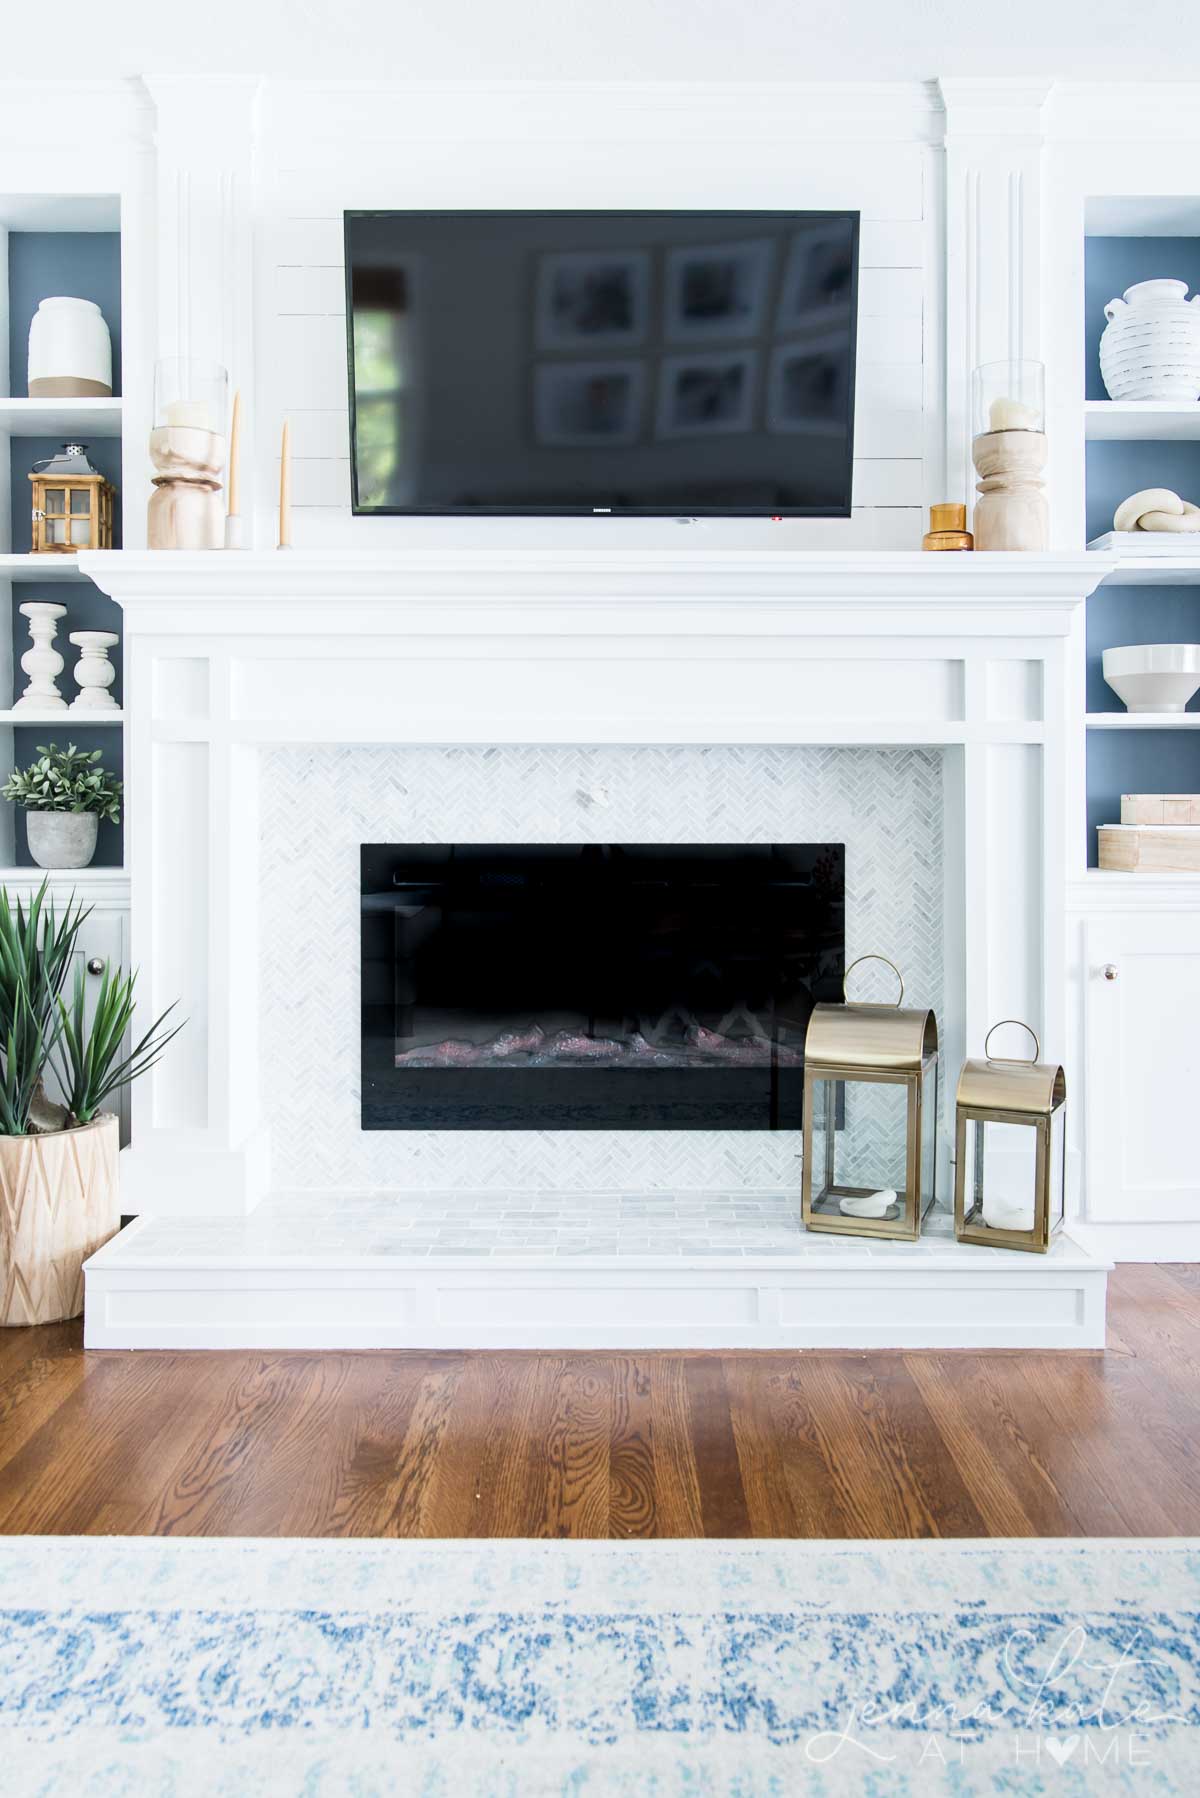 How to style a minimalist fireplace mantel for fall